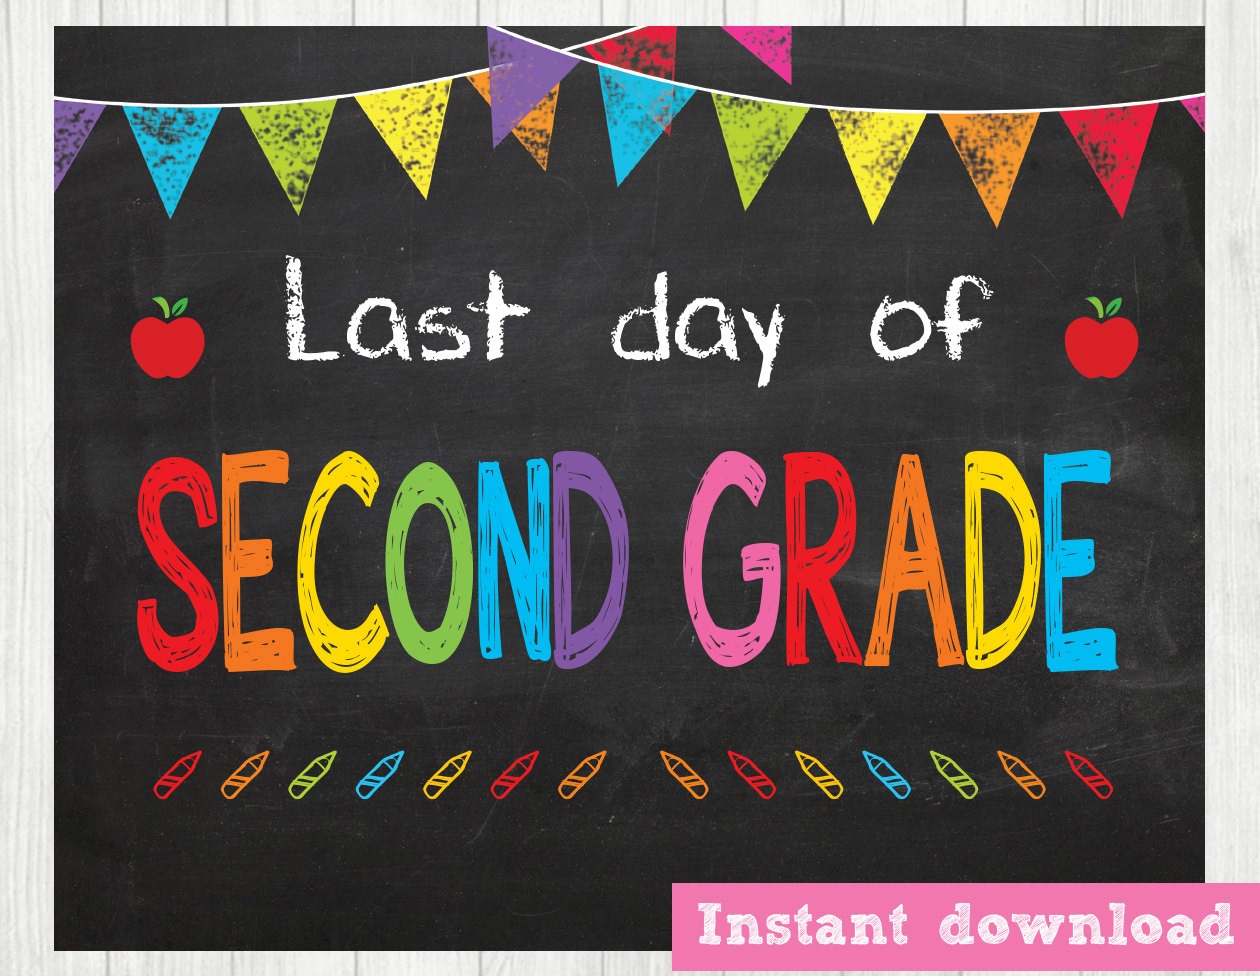 Last Day of Second Grade INSTANT DOWNLOAD Last Day by BlueBabyStar